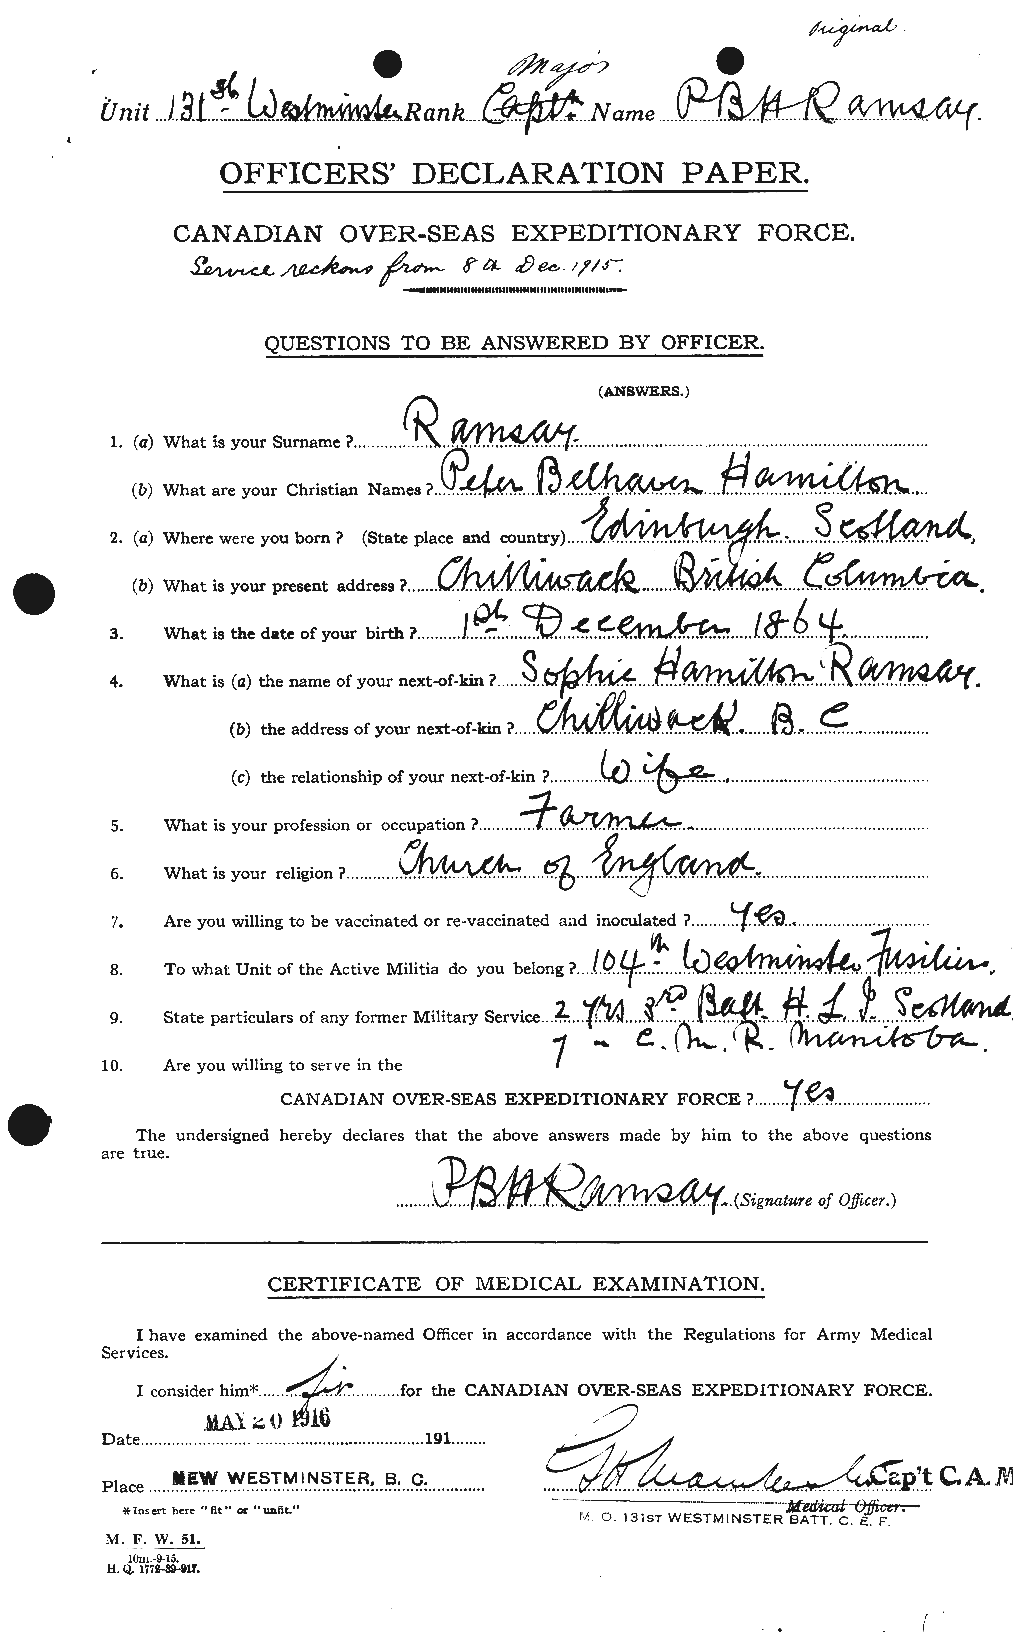 Personnel Records of the First World War - CEF 592578a